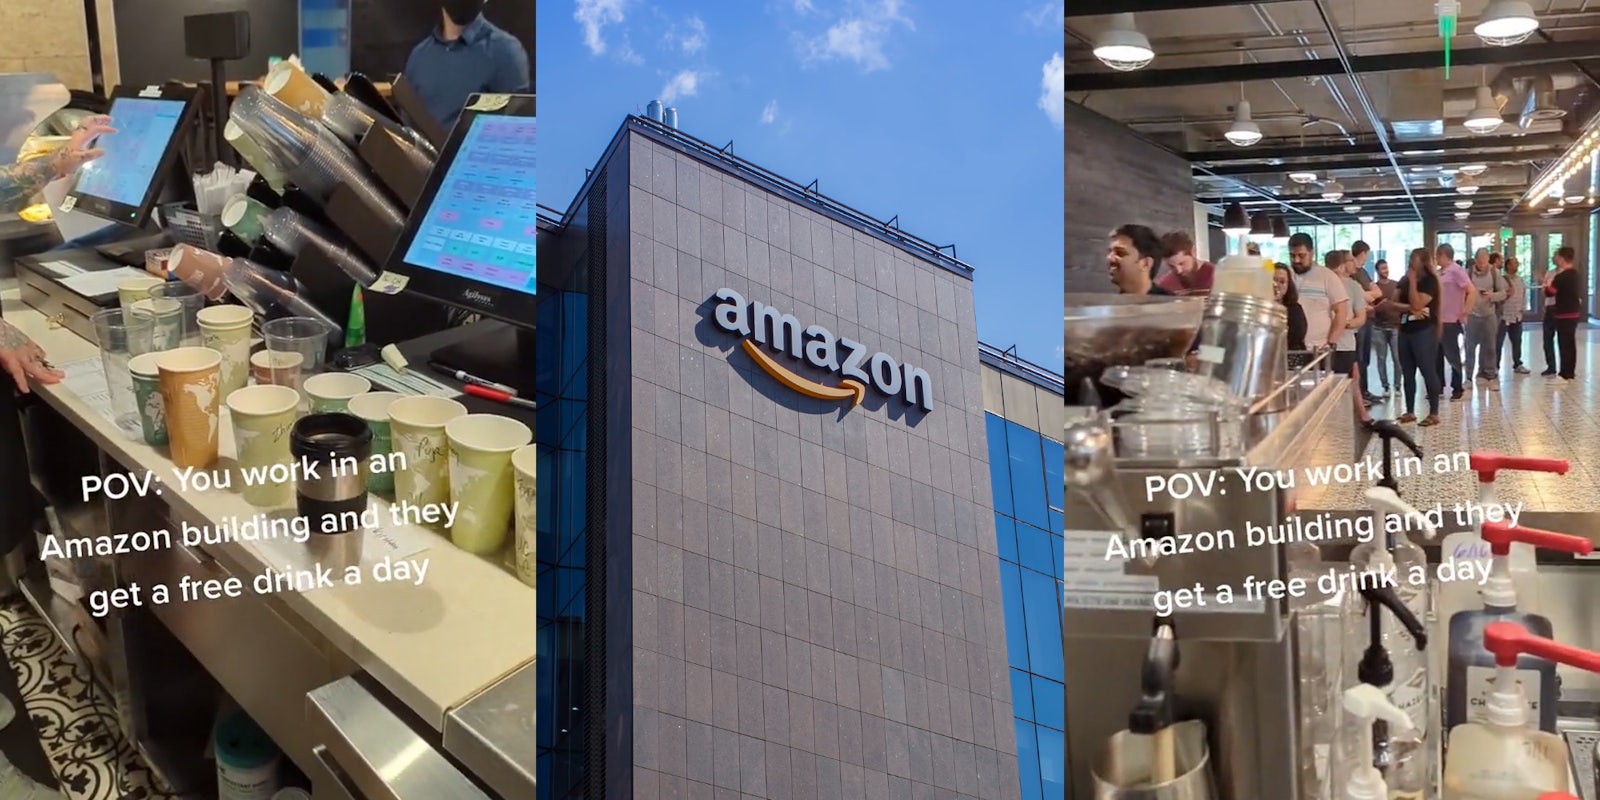 Amazon café interior with caption 'POV: You work in an Amazon building and they get a free drink a day' (l) Amazon building with sign (c) Amazon café interior with caption 'POV: You work in an Amazon building and they get a free drink a day' (r)